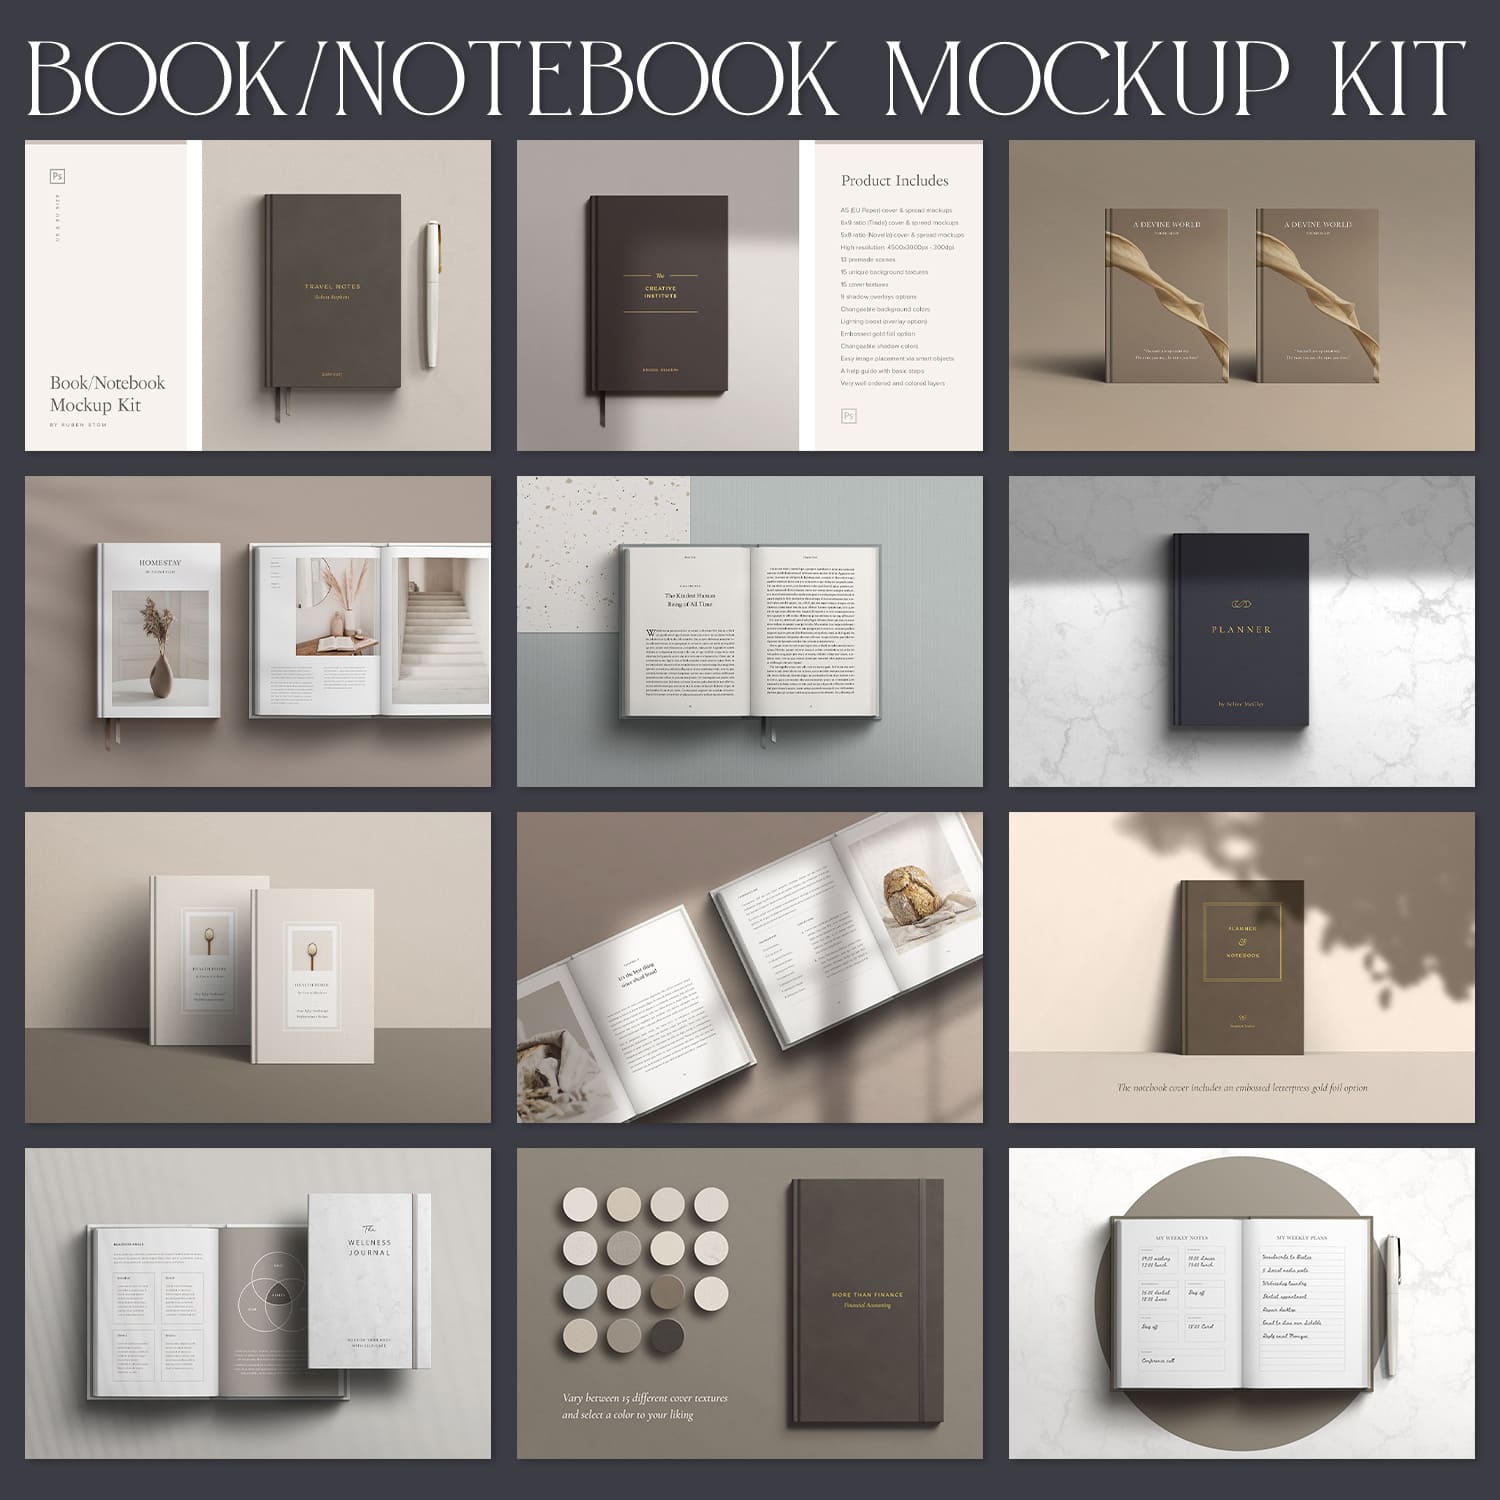 A set of images of books and notebooks with a charming design.